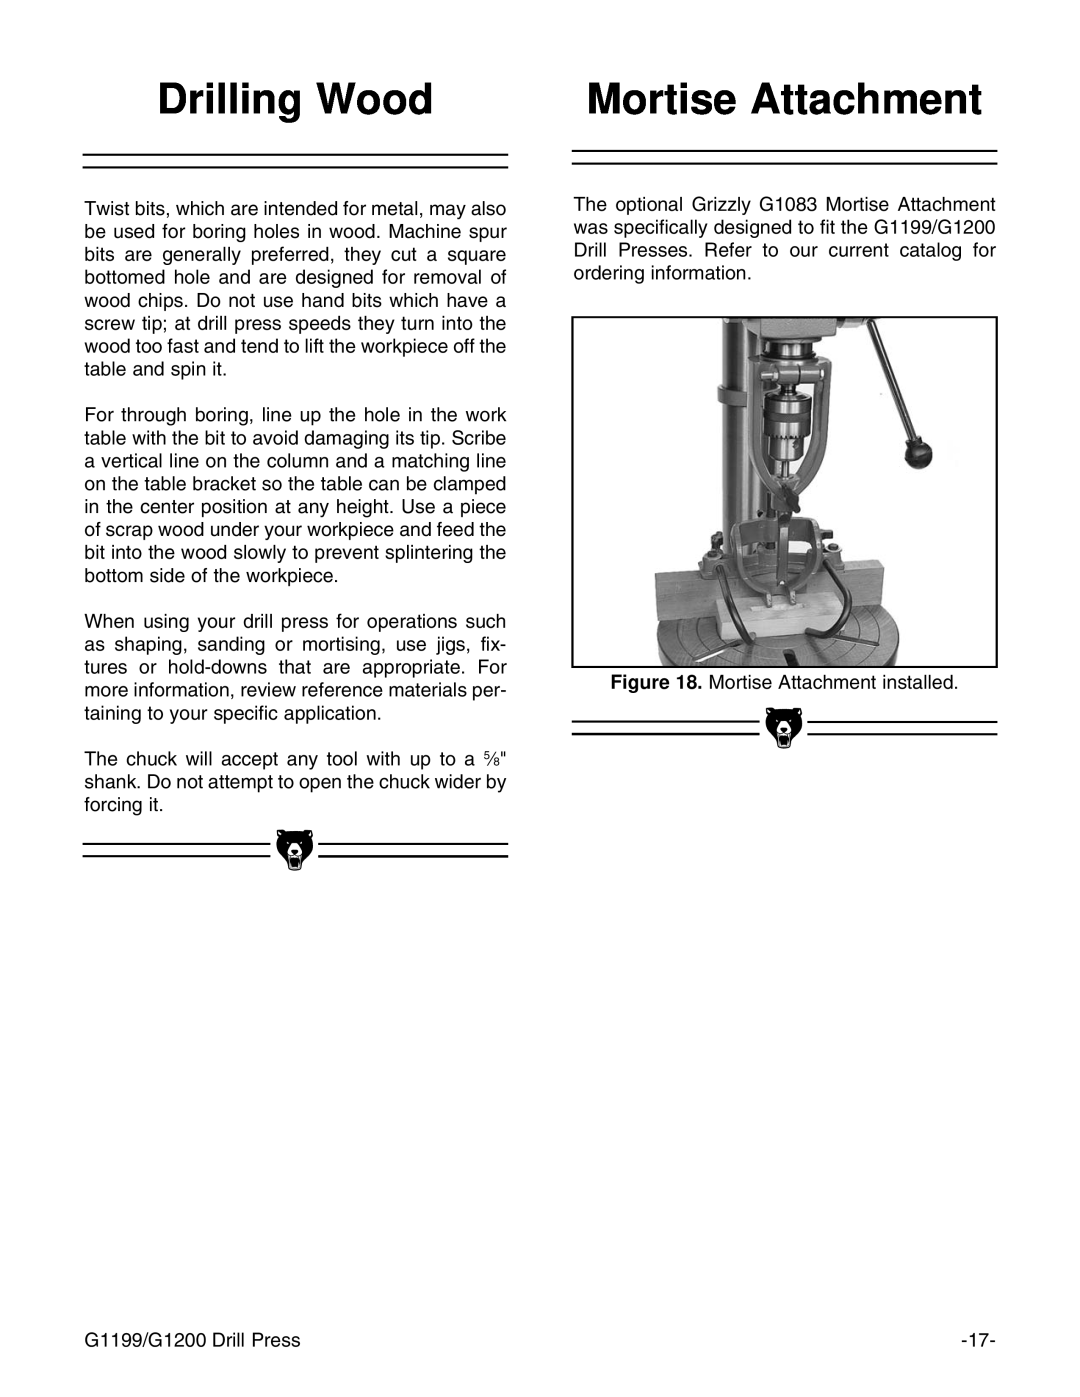 Grizzly G1200, G1199 instruction manual Drilling Wood, Mortise Attachment 